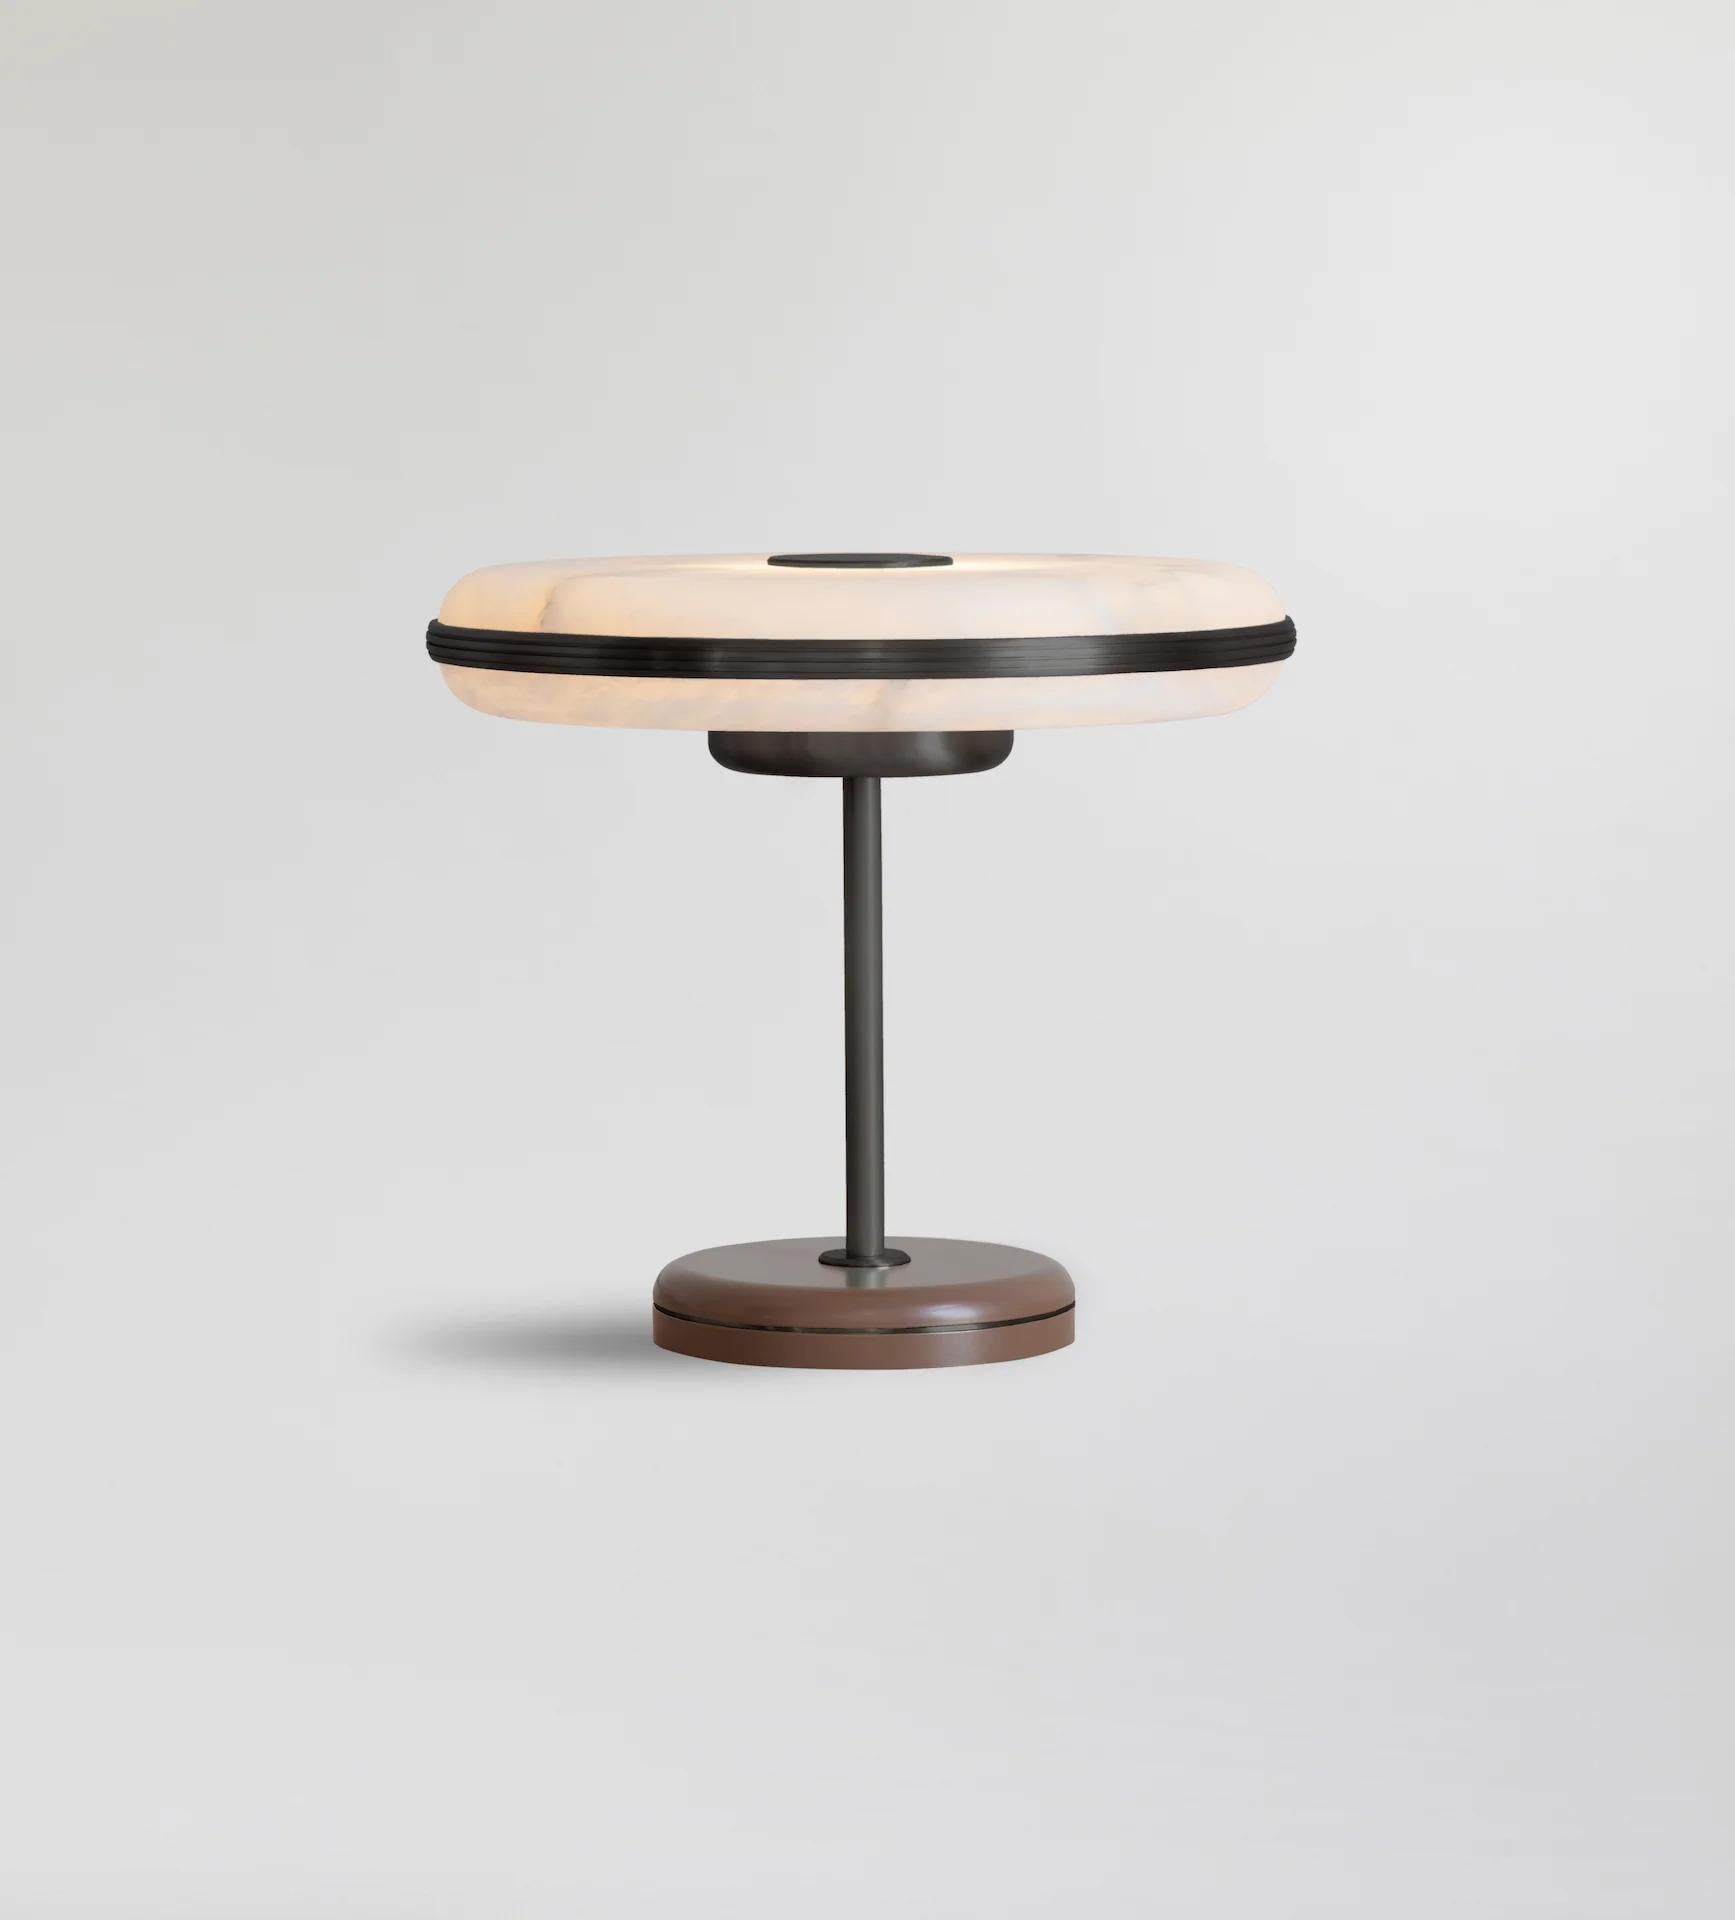 Beran Dark Bronze Large Table Lamp by Bert Frank
Dimensions: Ø 36 x H 32 cm.
Materials: Bronze and alabaster.
Base finish: Hazel.

Available in two different sizes. Available in different finishes and materials. Please contact us. 

The natural